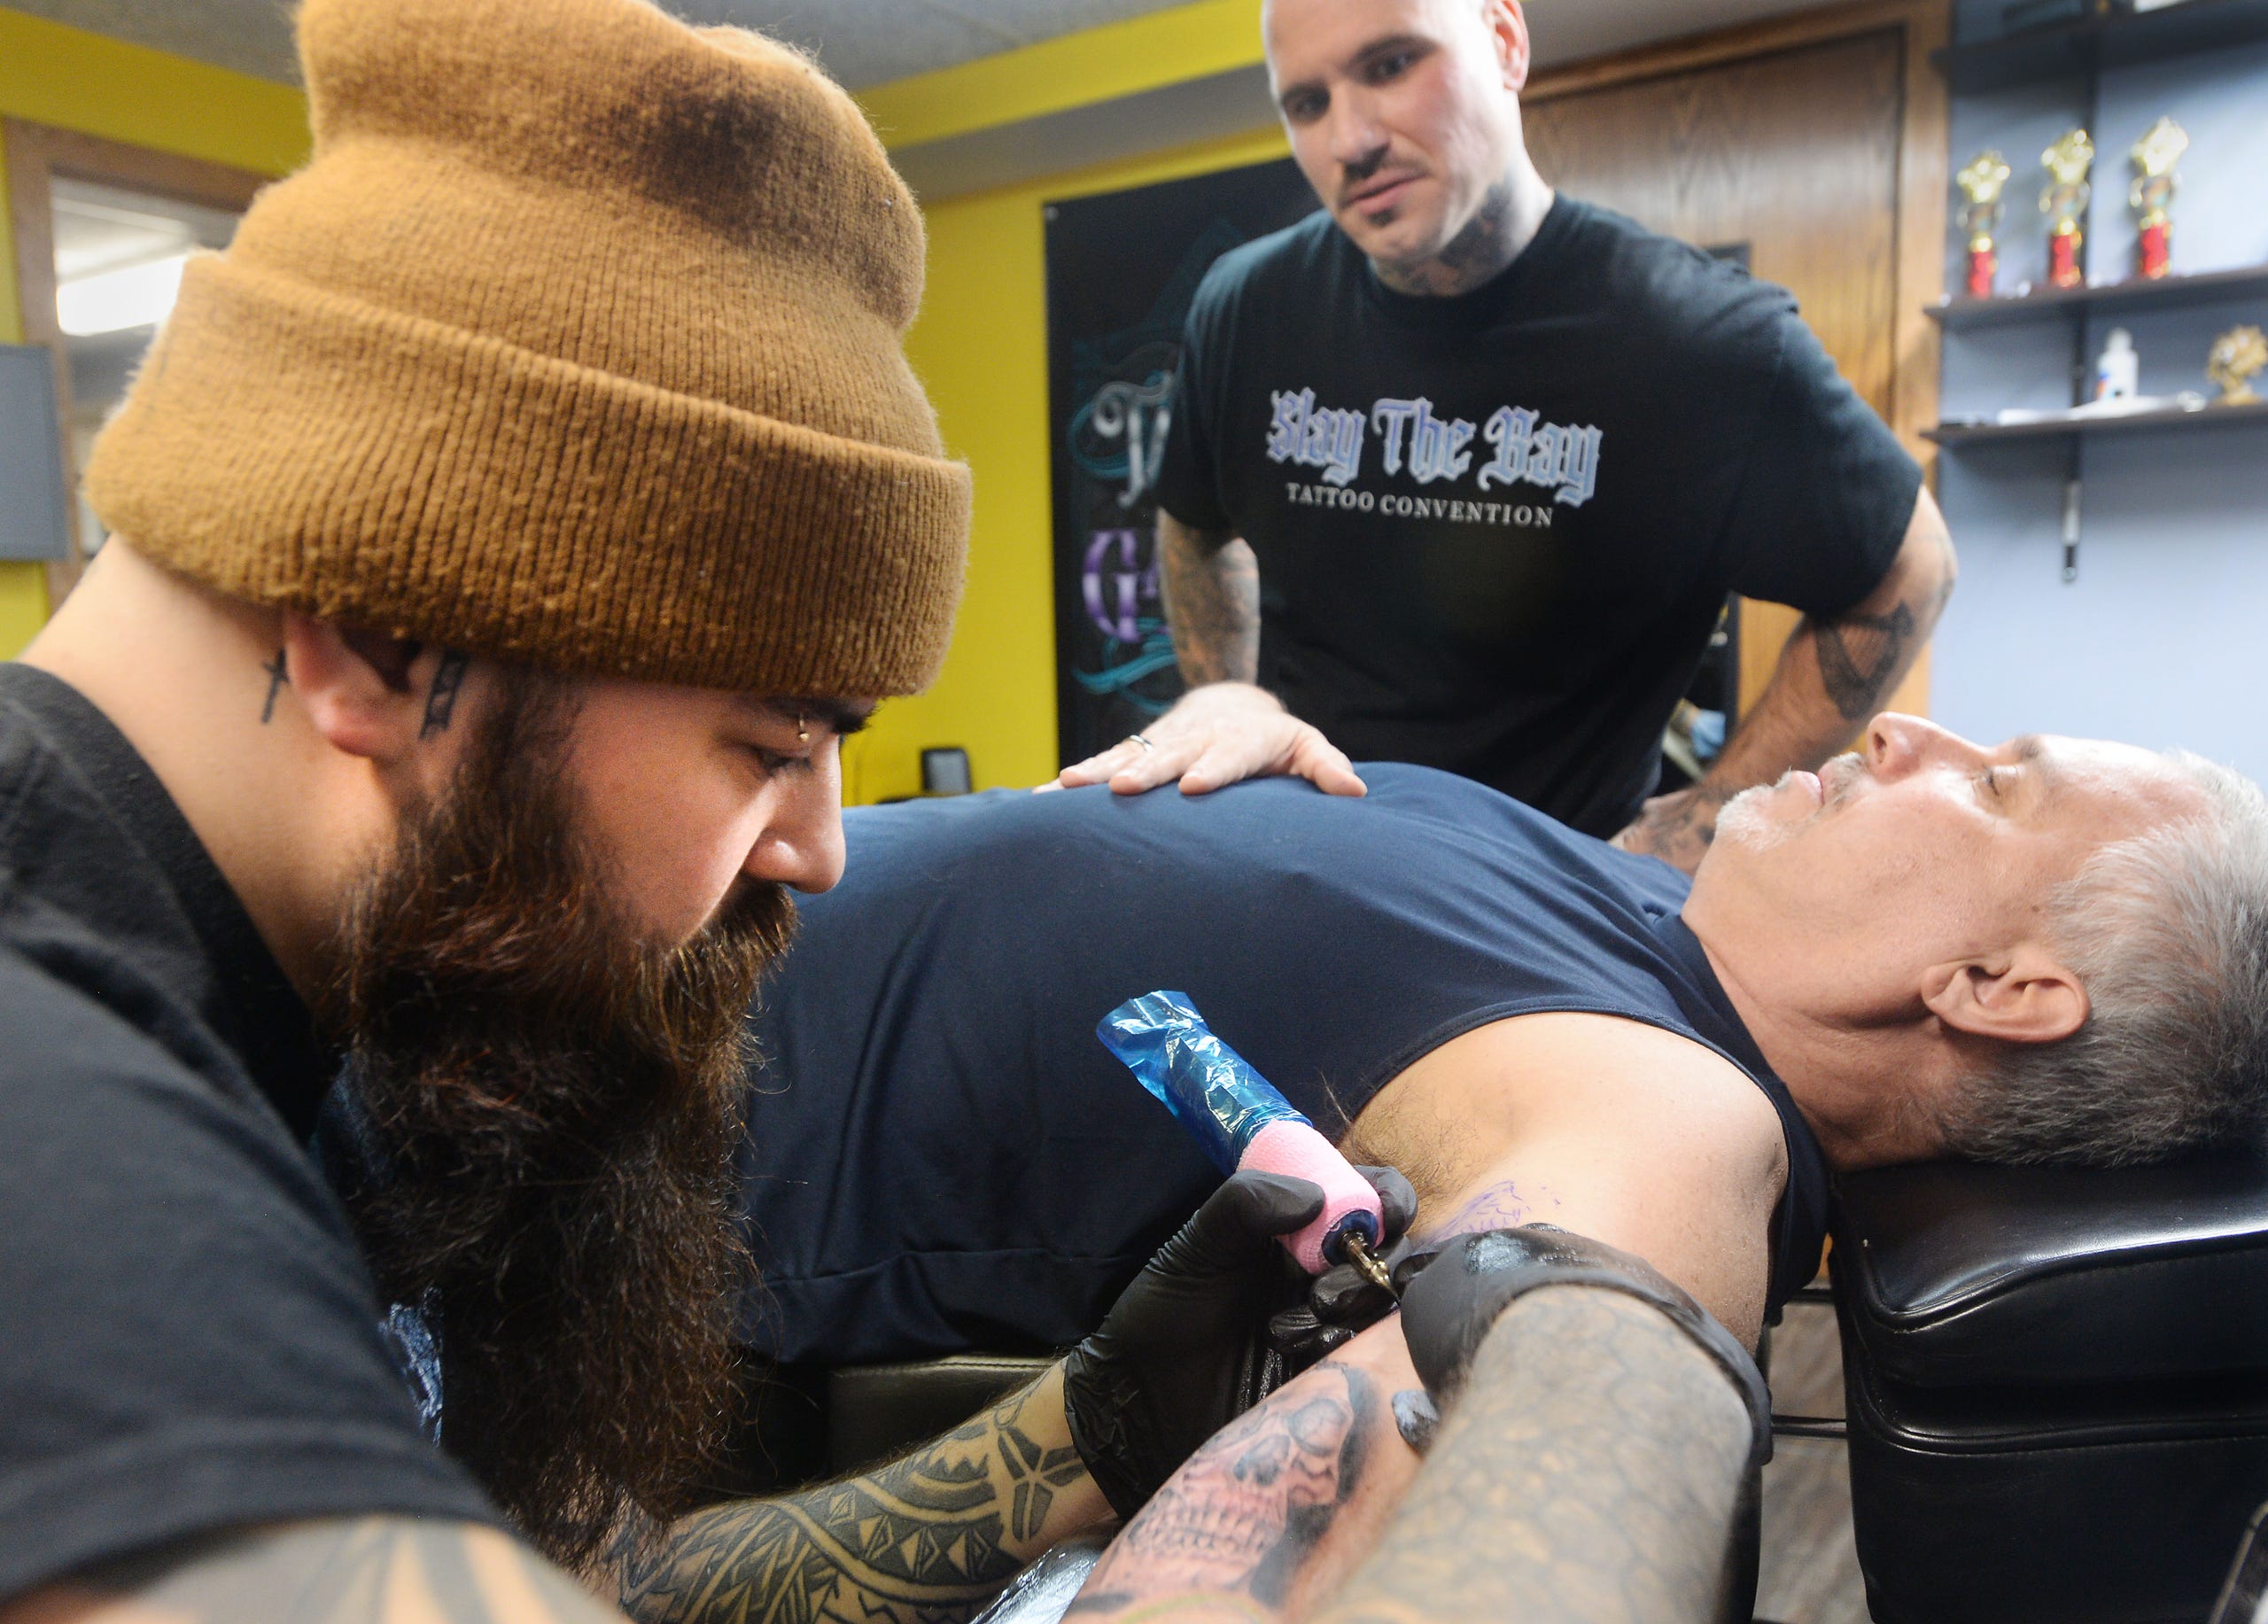 Tattoo artist Garrett Ybanez, left, works on a design for customer Tom Kolb, 59, right, on Dec. 14, 2021, at InkXpression tattoo shop in Millcreek Township. Ybanez, 30, and colleague Ryan Quinn, 32, center, are coordinating the upcoming "Slay the Bay" tattooing convention.